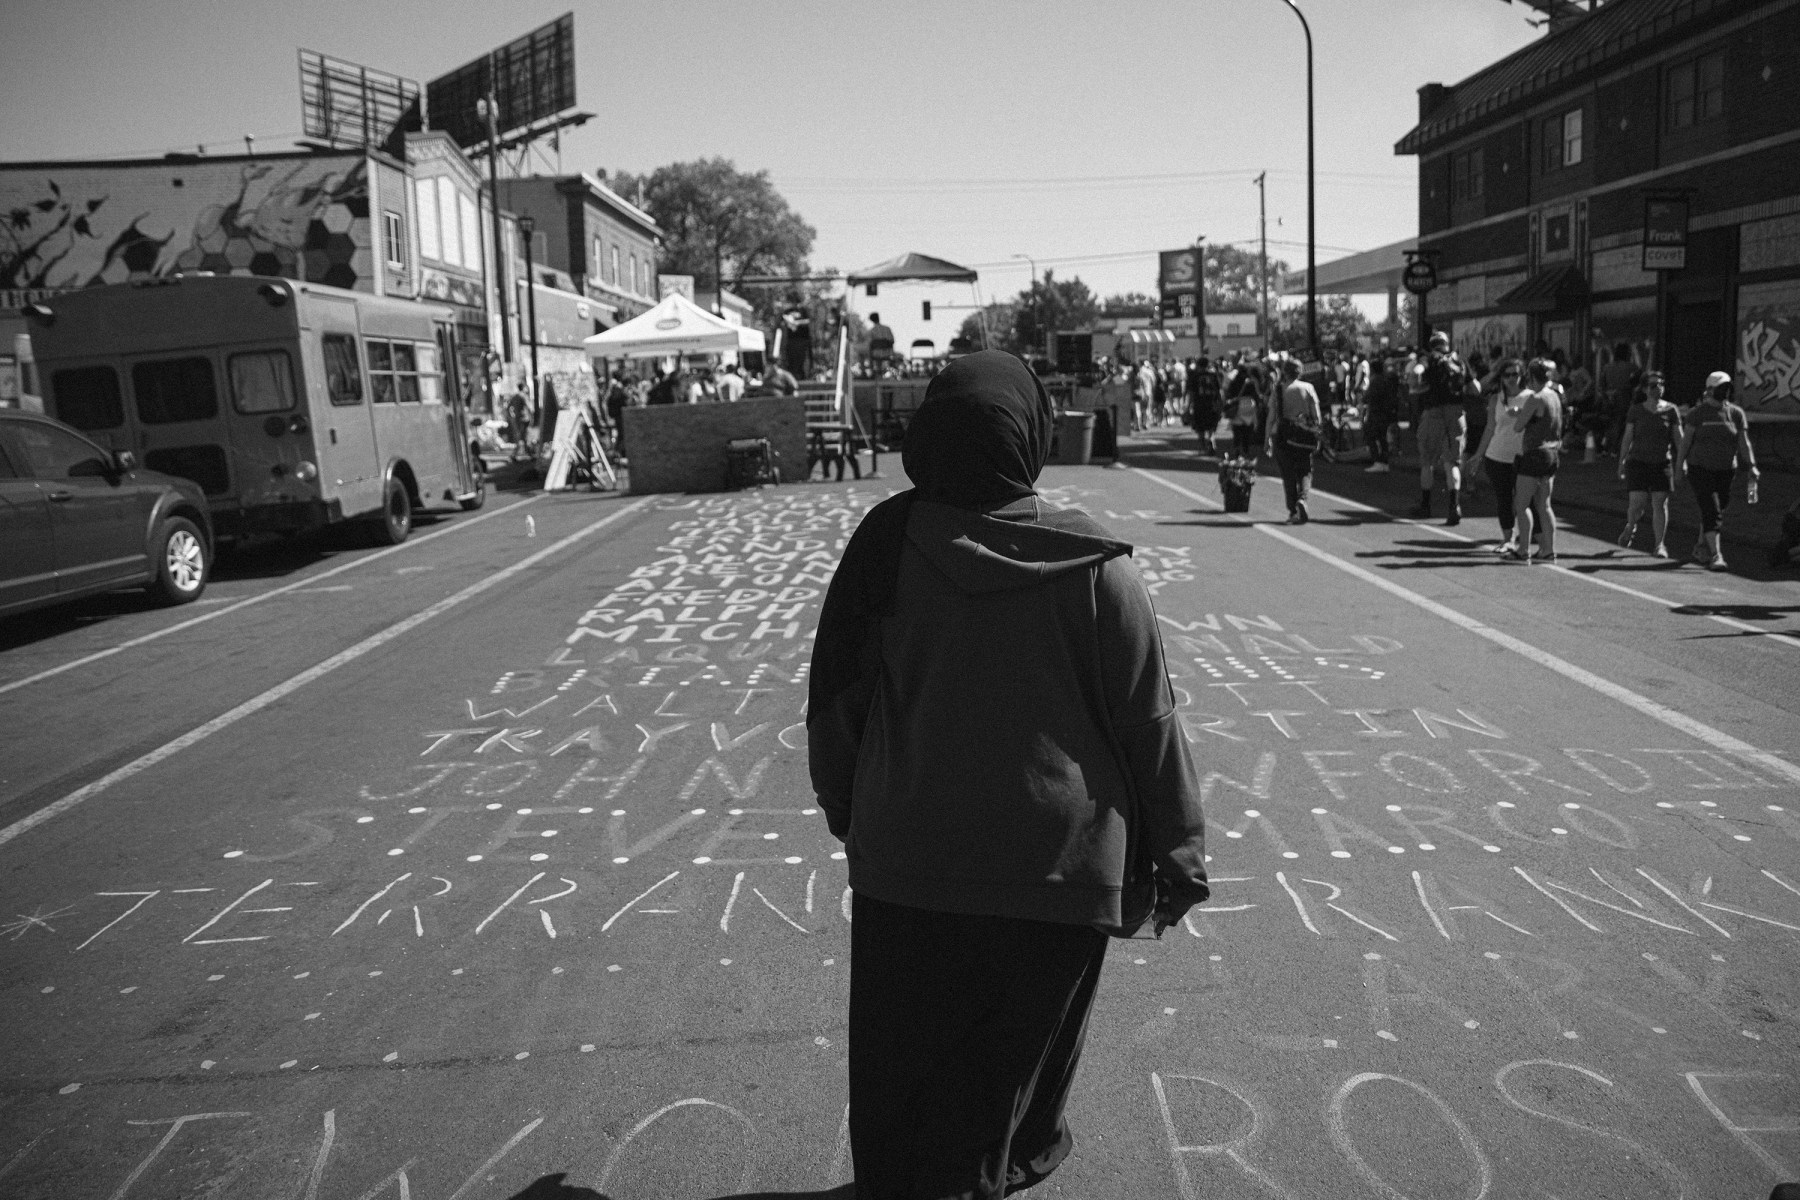 Walking across the names of George Floyd, Jamar Clark, Sandra Bland, Breonna Taylor and others.